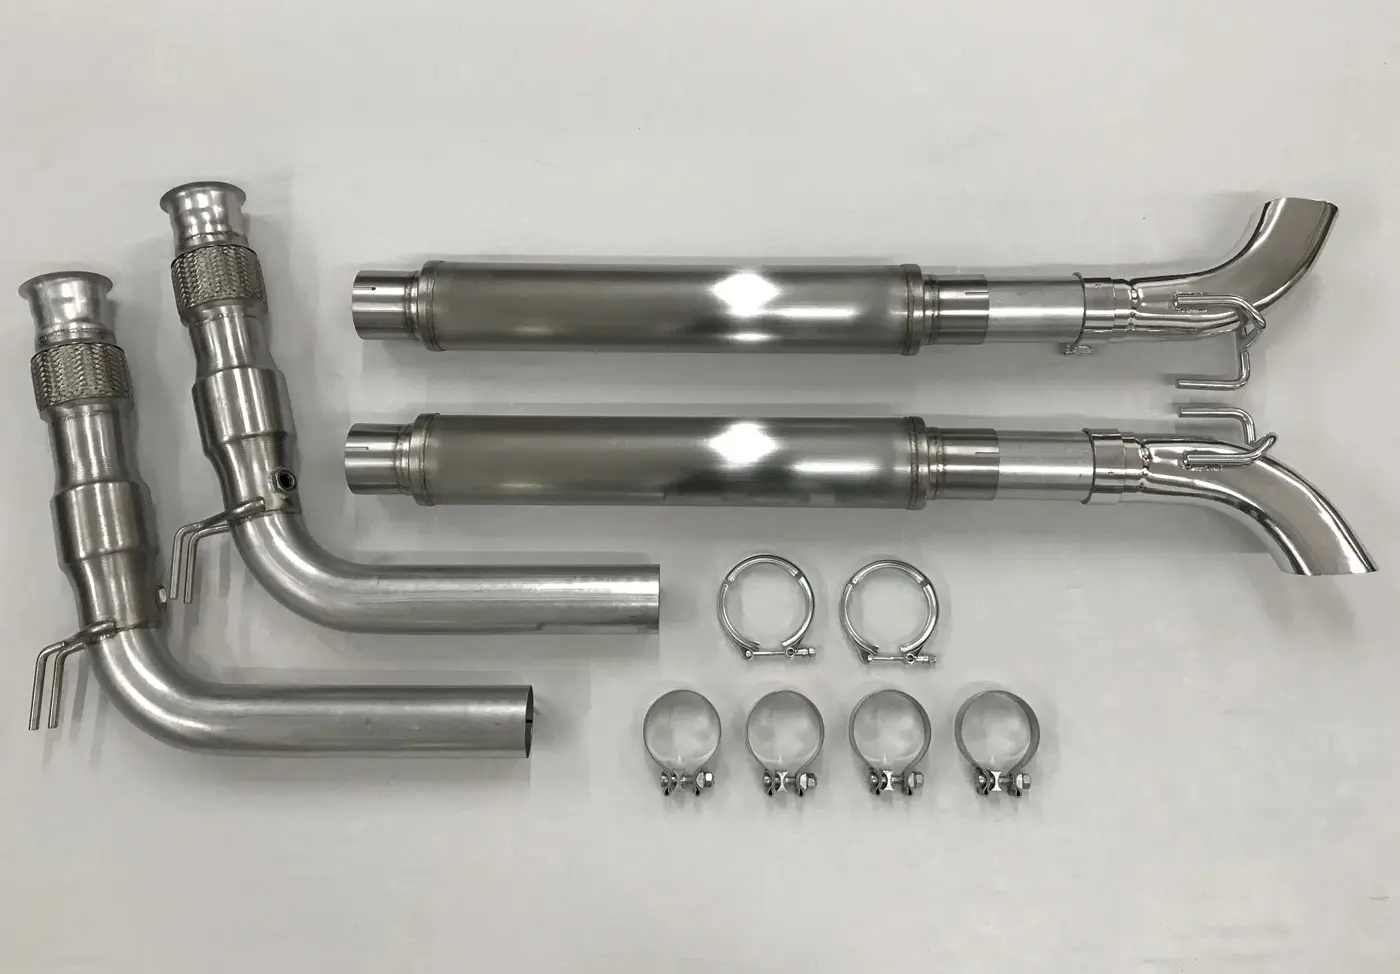 A pair of exhaust pipes and other parts.